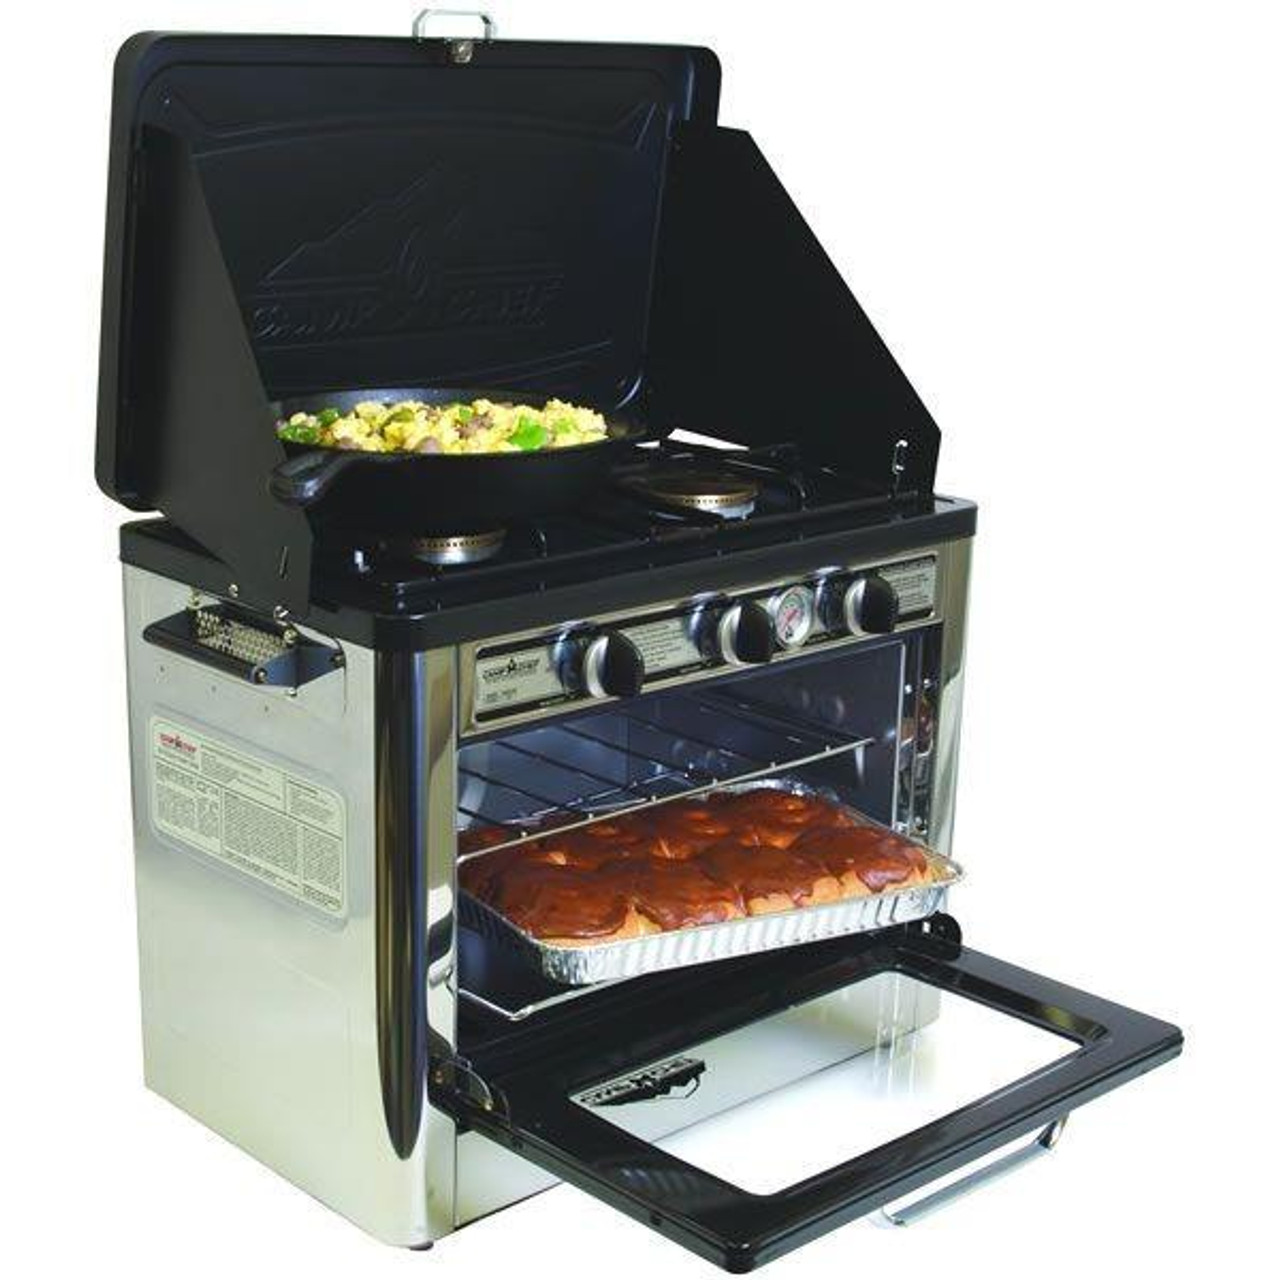 https://cdn11.bigcommerce.com/s-70mih4s/images/stencil/1280x1280/products/14743/34255/Camp-Chef-Deluxe-Outdoor-Oven-033246209722_image1__28586.1491342355.jpg?c=2